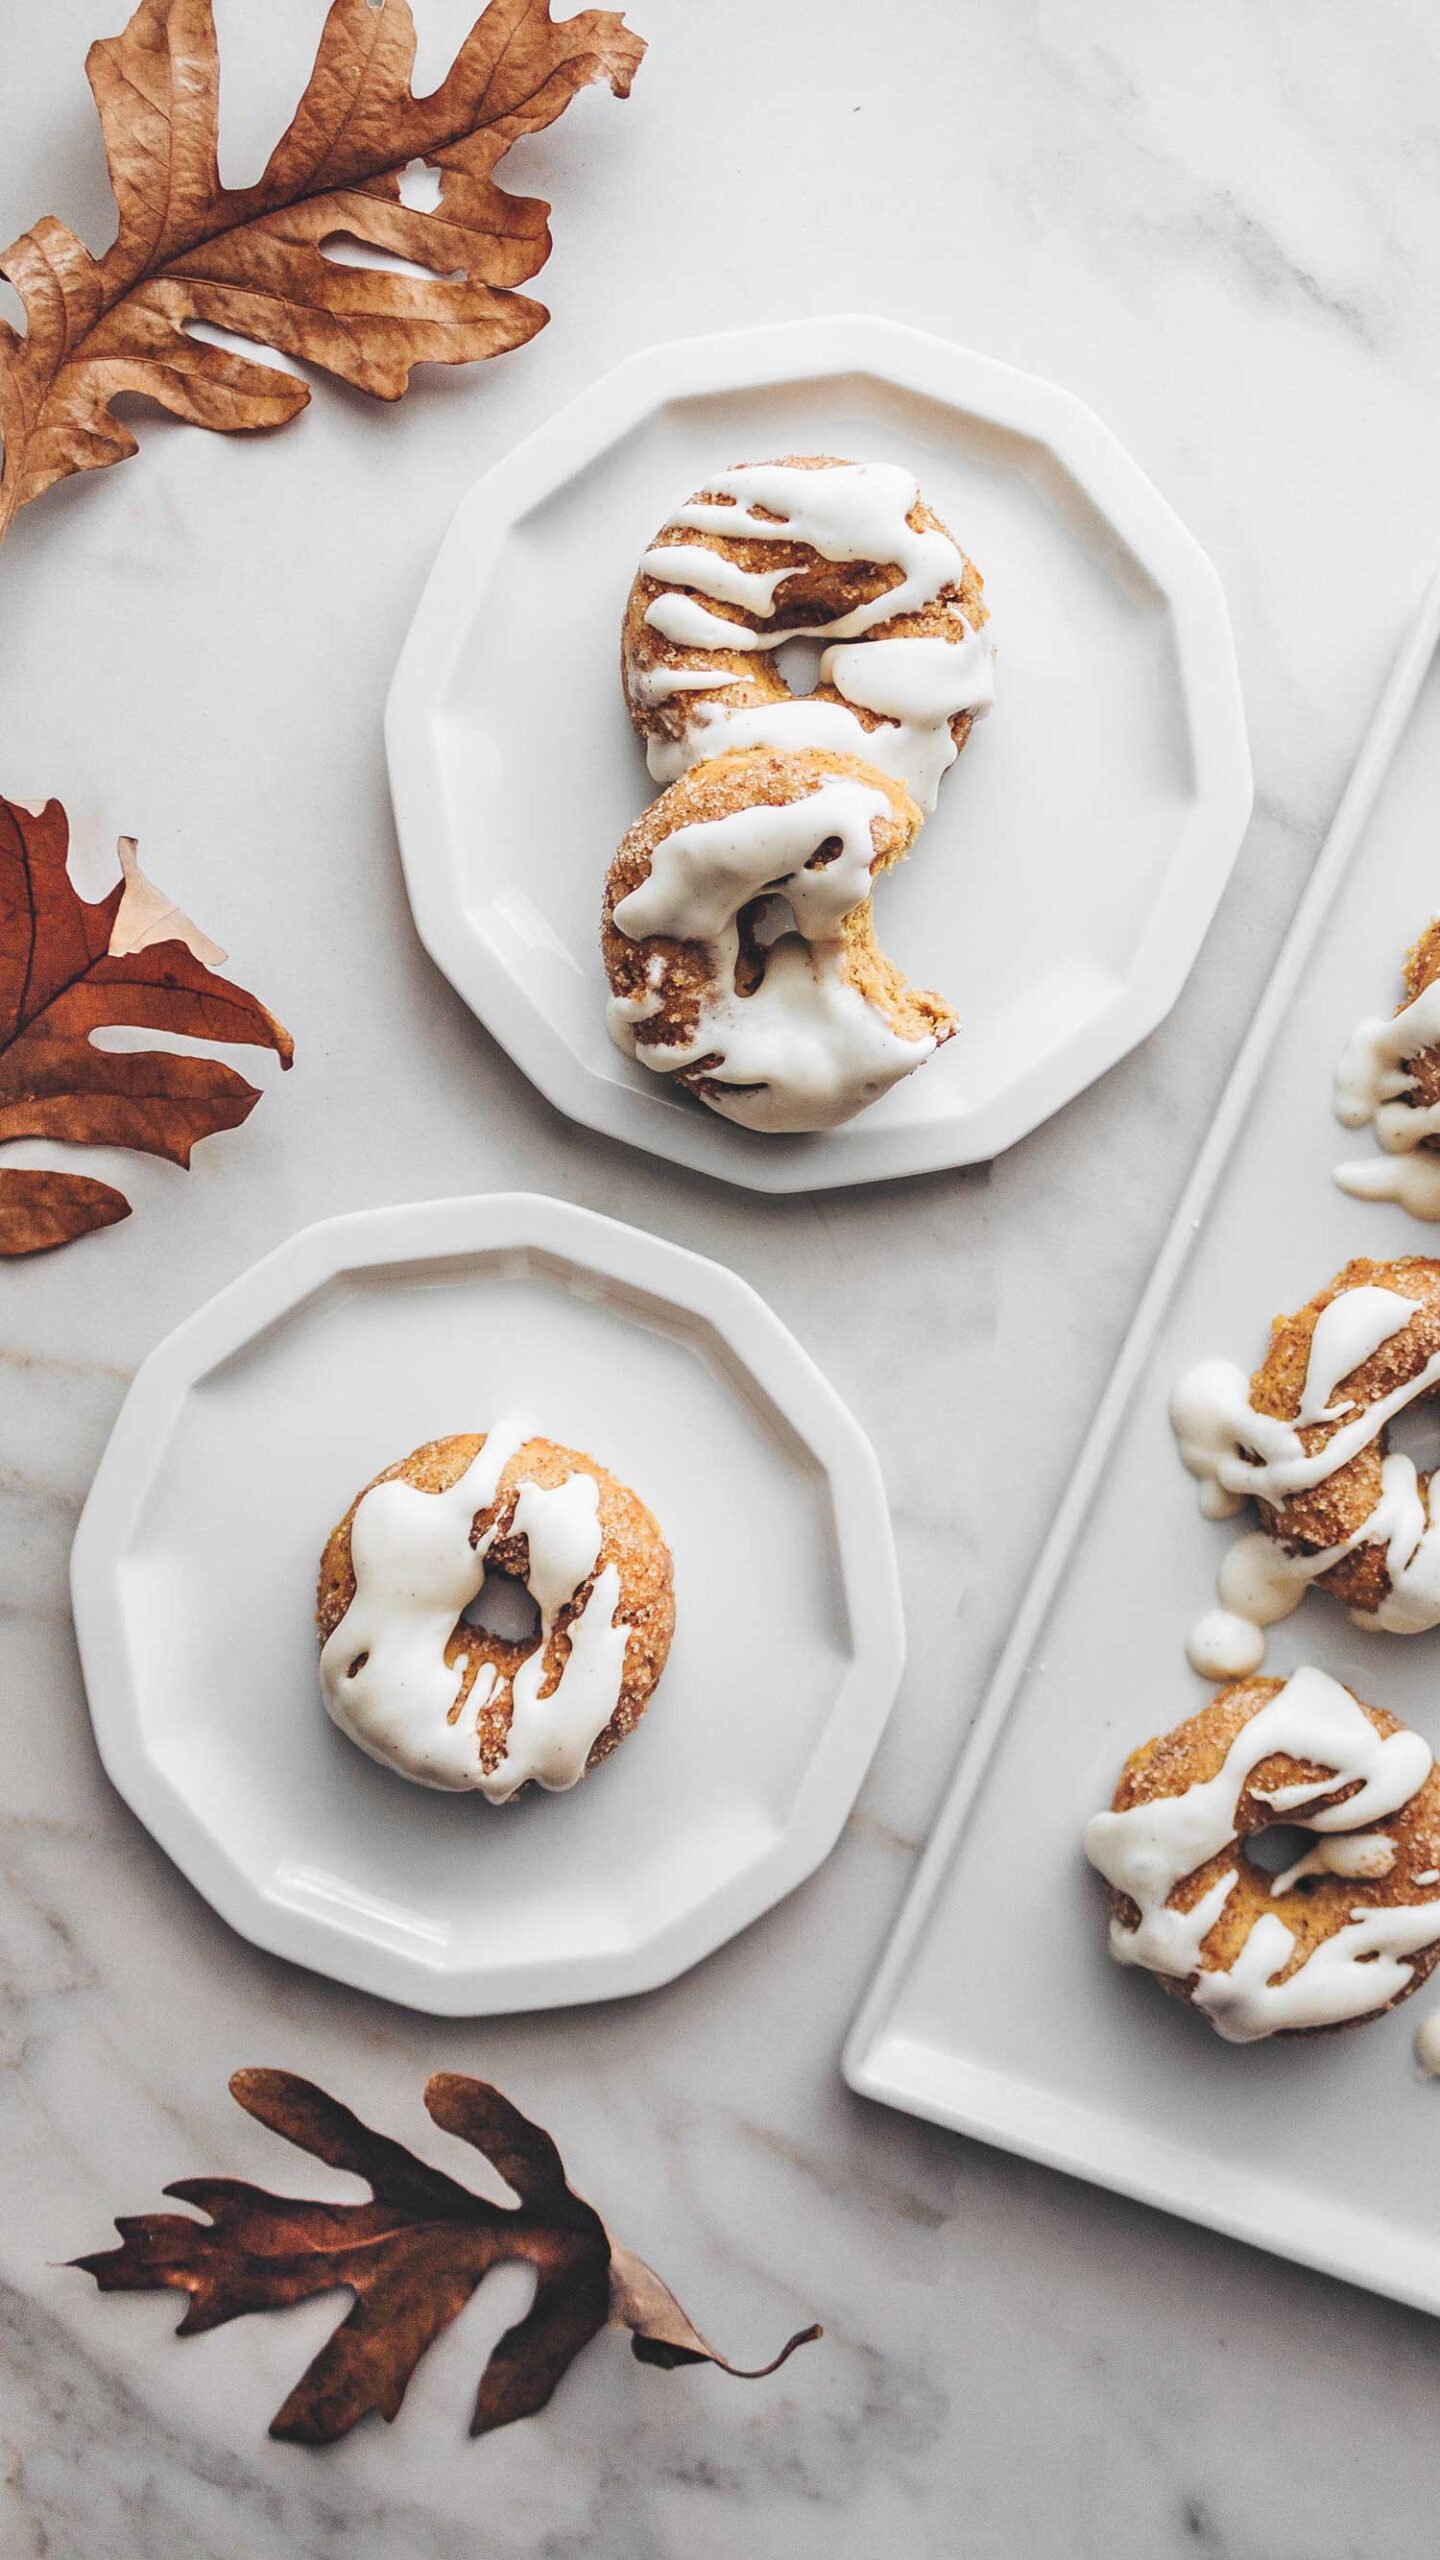 Keto pumpkin spice donuts drizzled with cream cheese glaze on white plates with fall leaves scattered around.